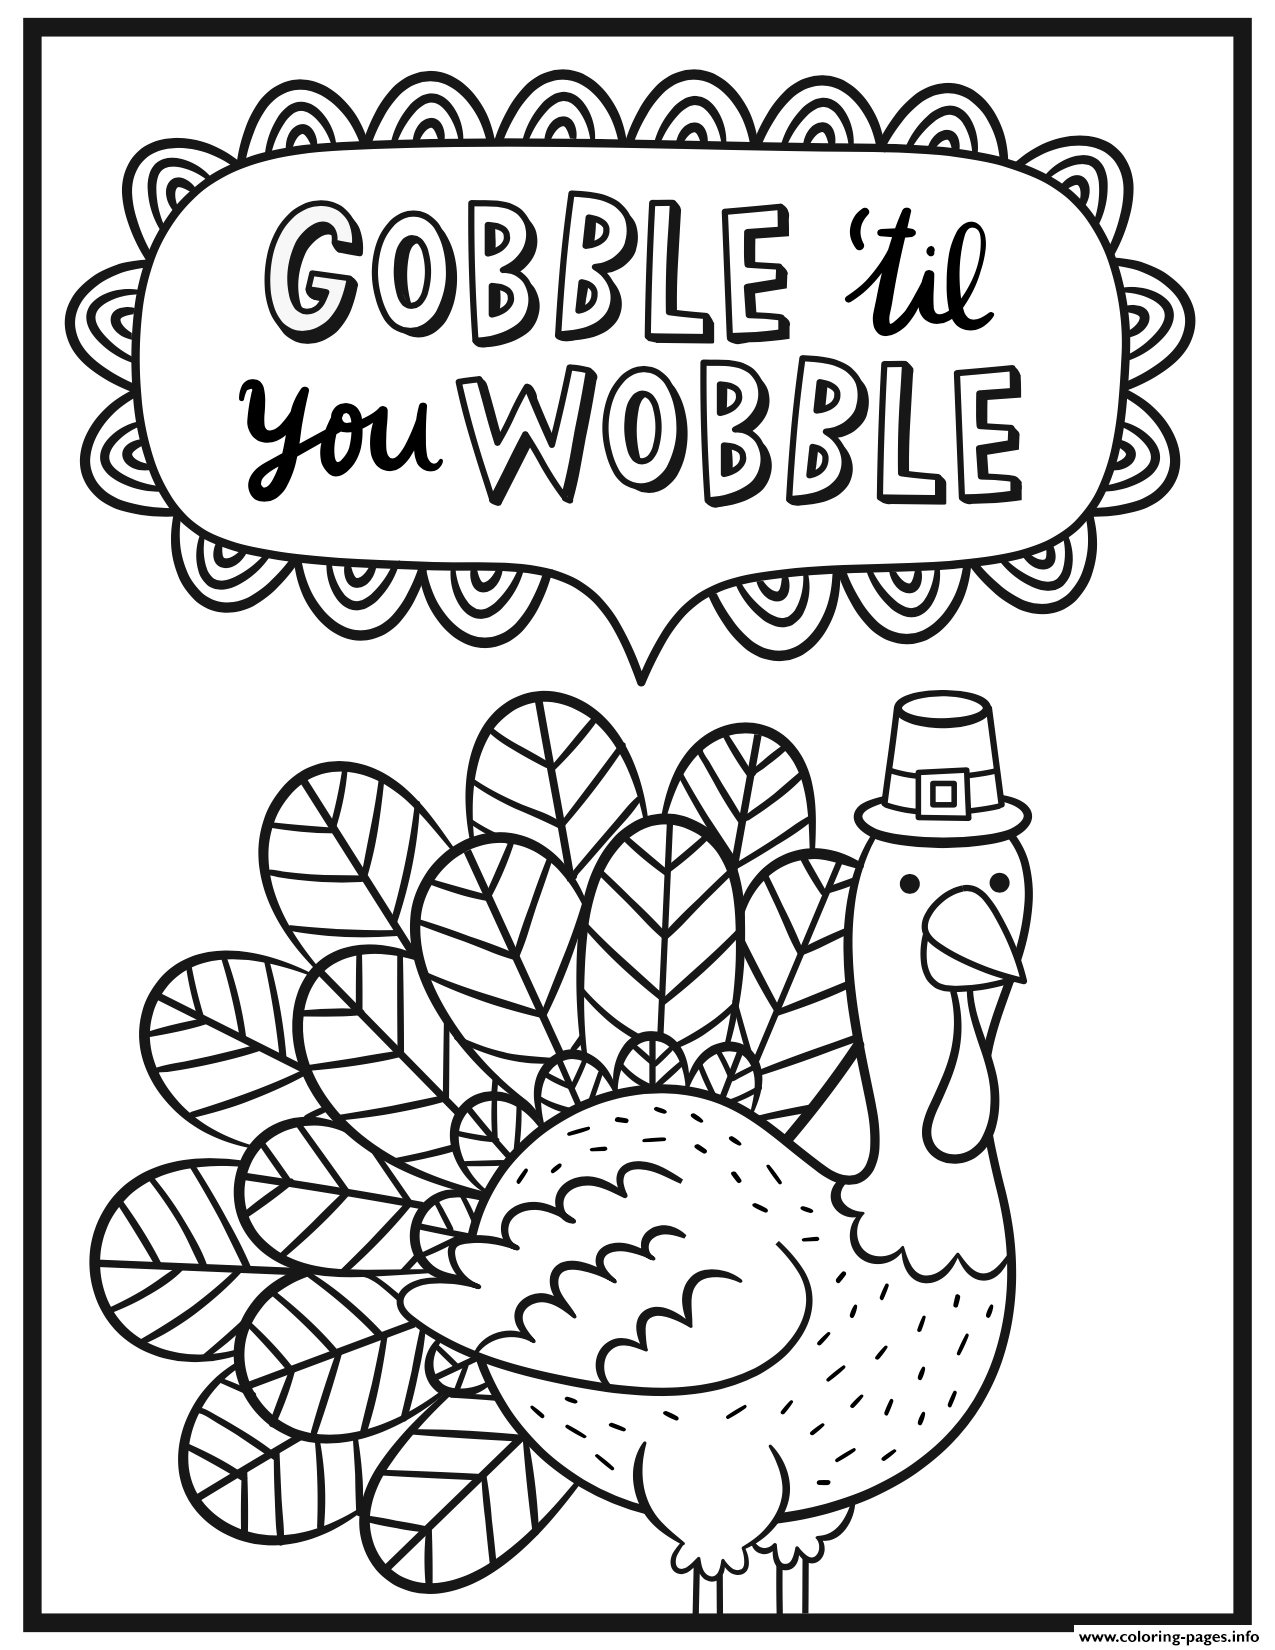 Download Thanksgiving Gobble Til You Wobble Coloring Pages Printable